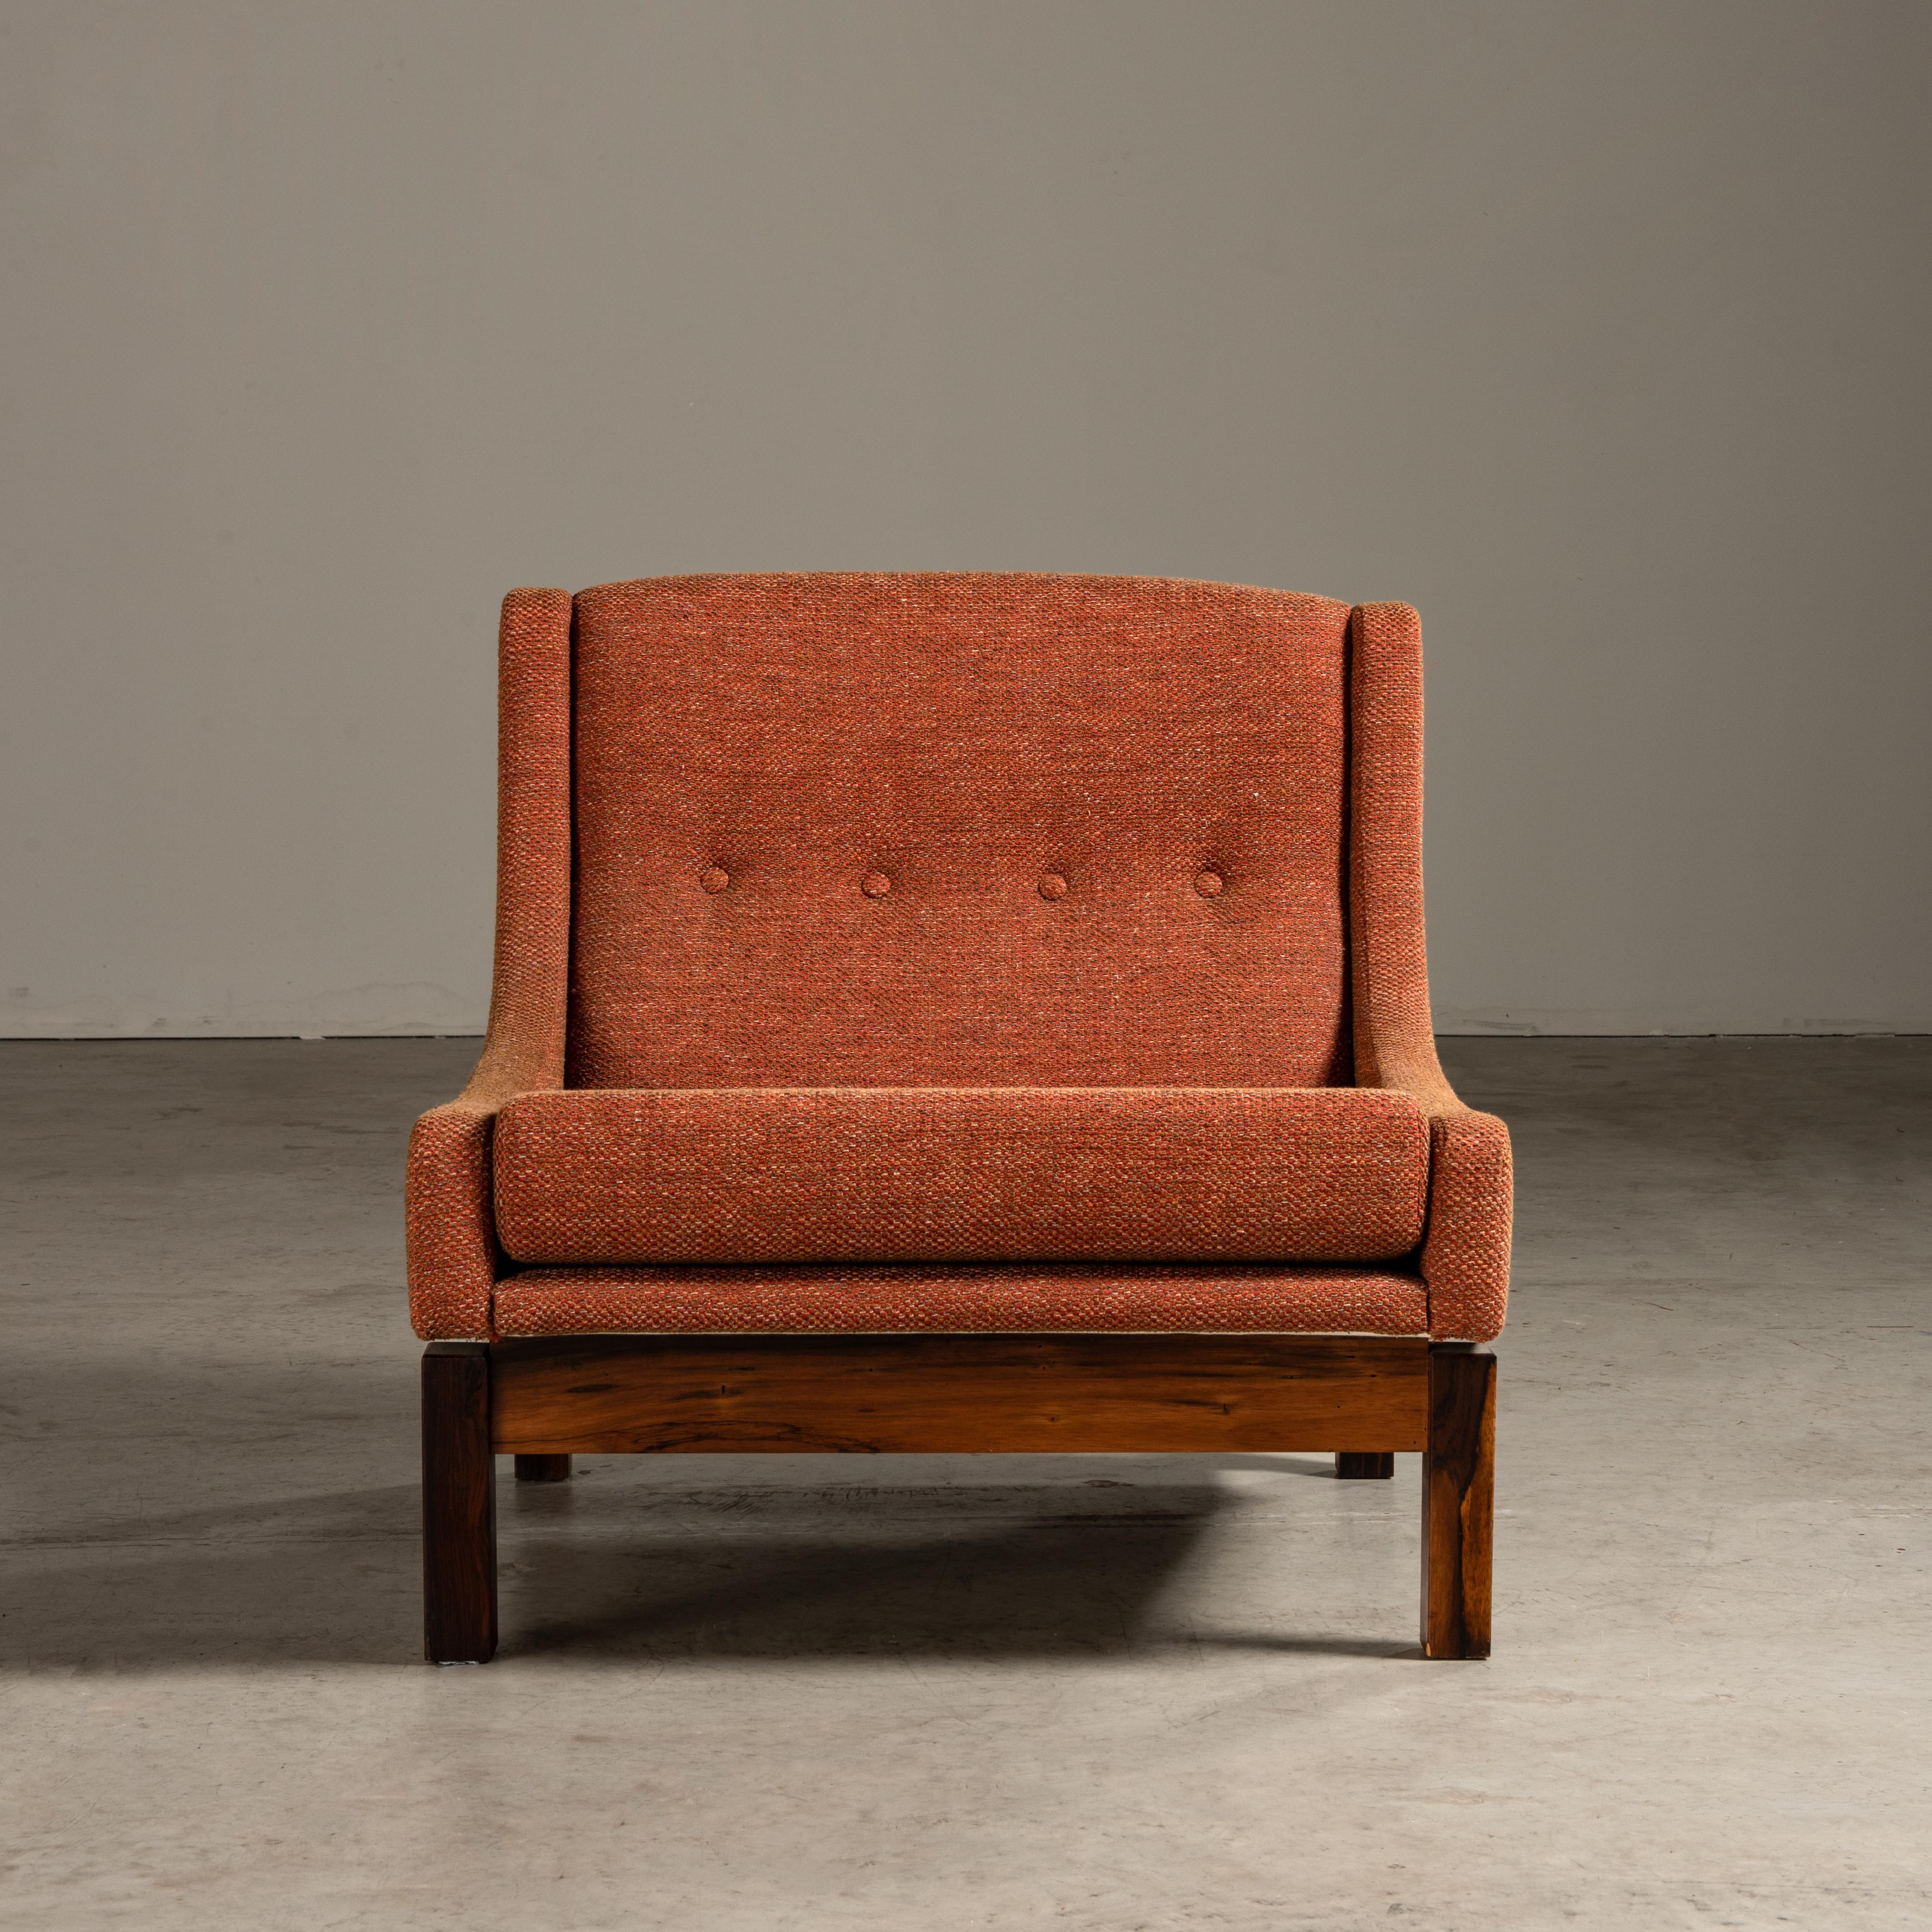 Fabric 'Paraty´ Lounge Chair, by Sergio Rodrigues, Brazilian Mid-Century Modern Design  For Sale